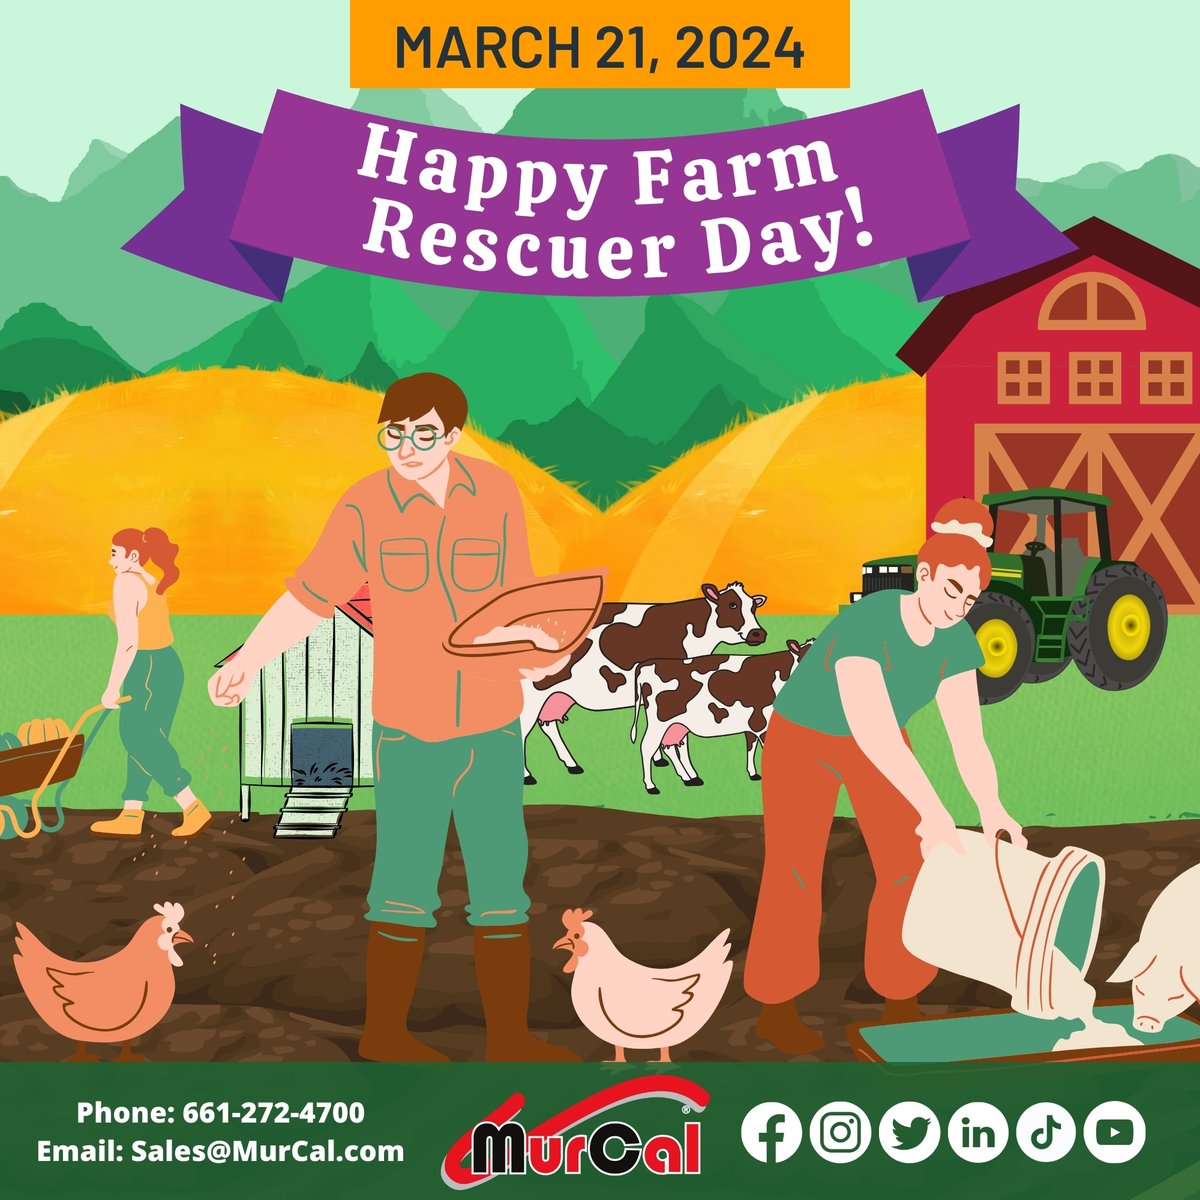 Today we celebrate the helpers here at MurCal.com! 
Happy #NationalFarmRescuerDay 👨‍🌾 to every farm rescuer for their selfless service. When crisis strikes in the form of illness, injury or natural disaster, Farm Rescuers get the jobs done. We Salute You!

#farmrescue